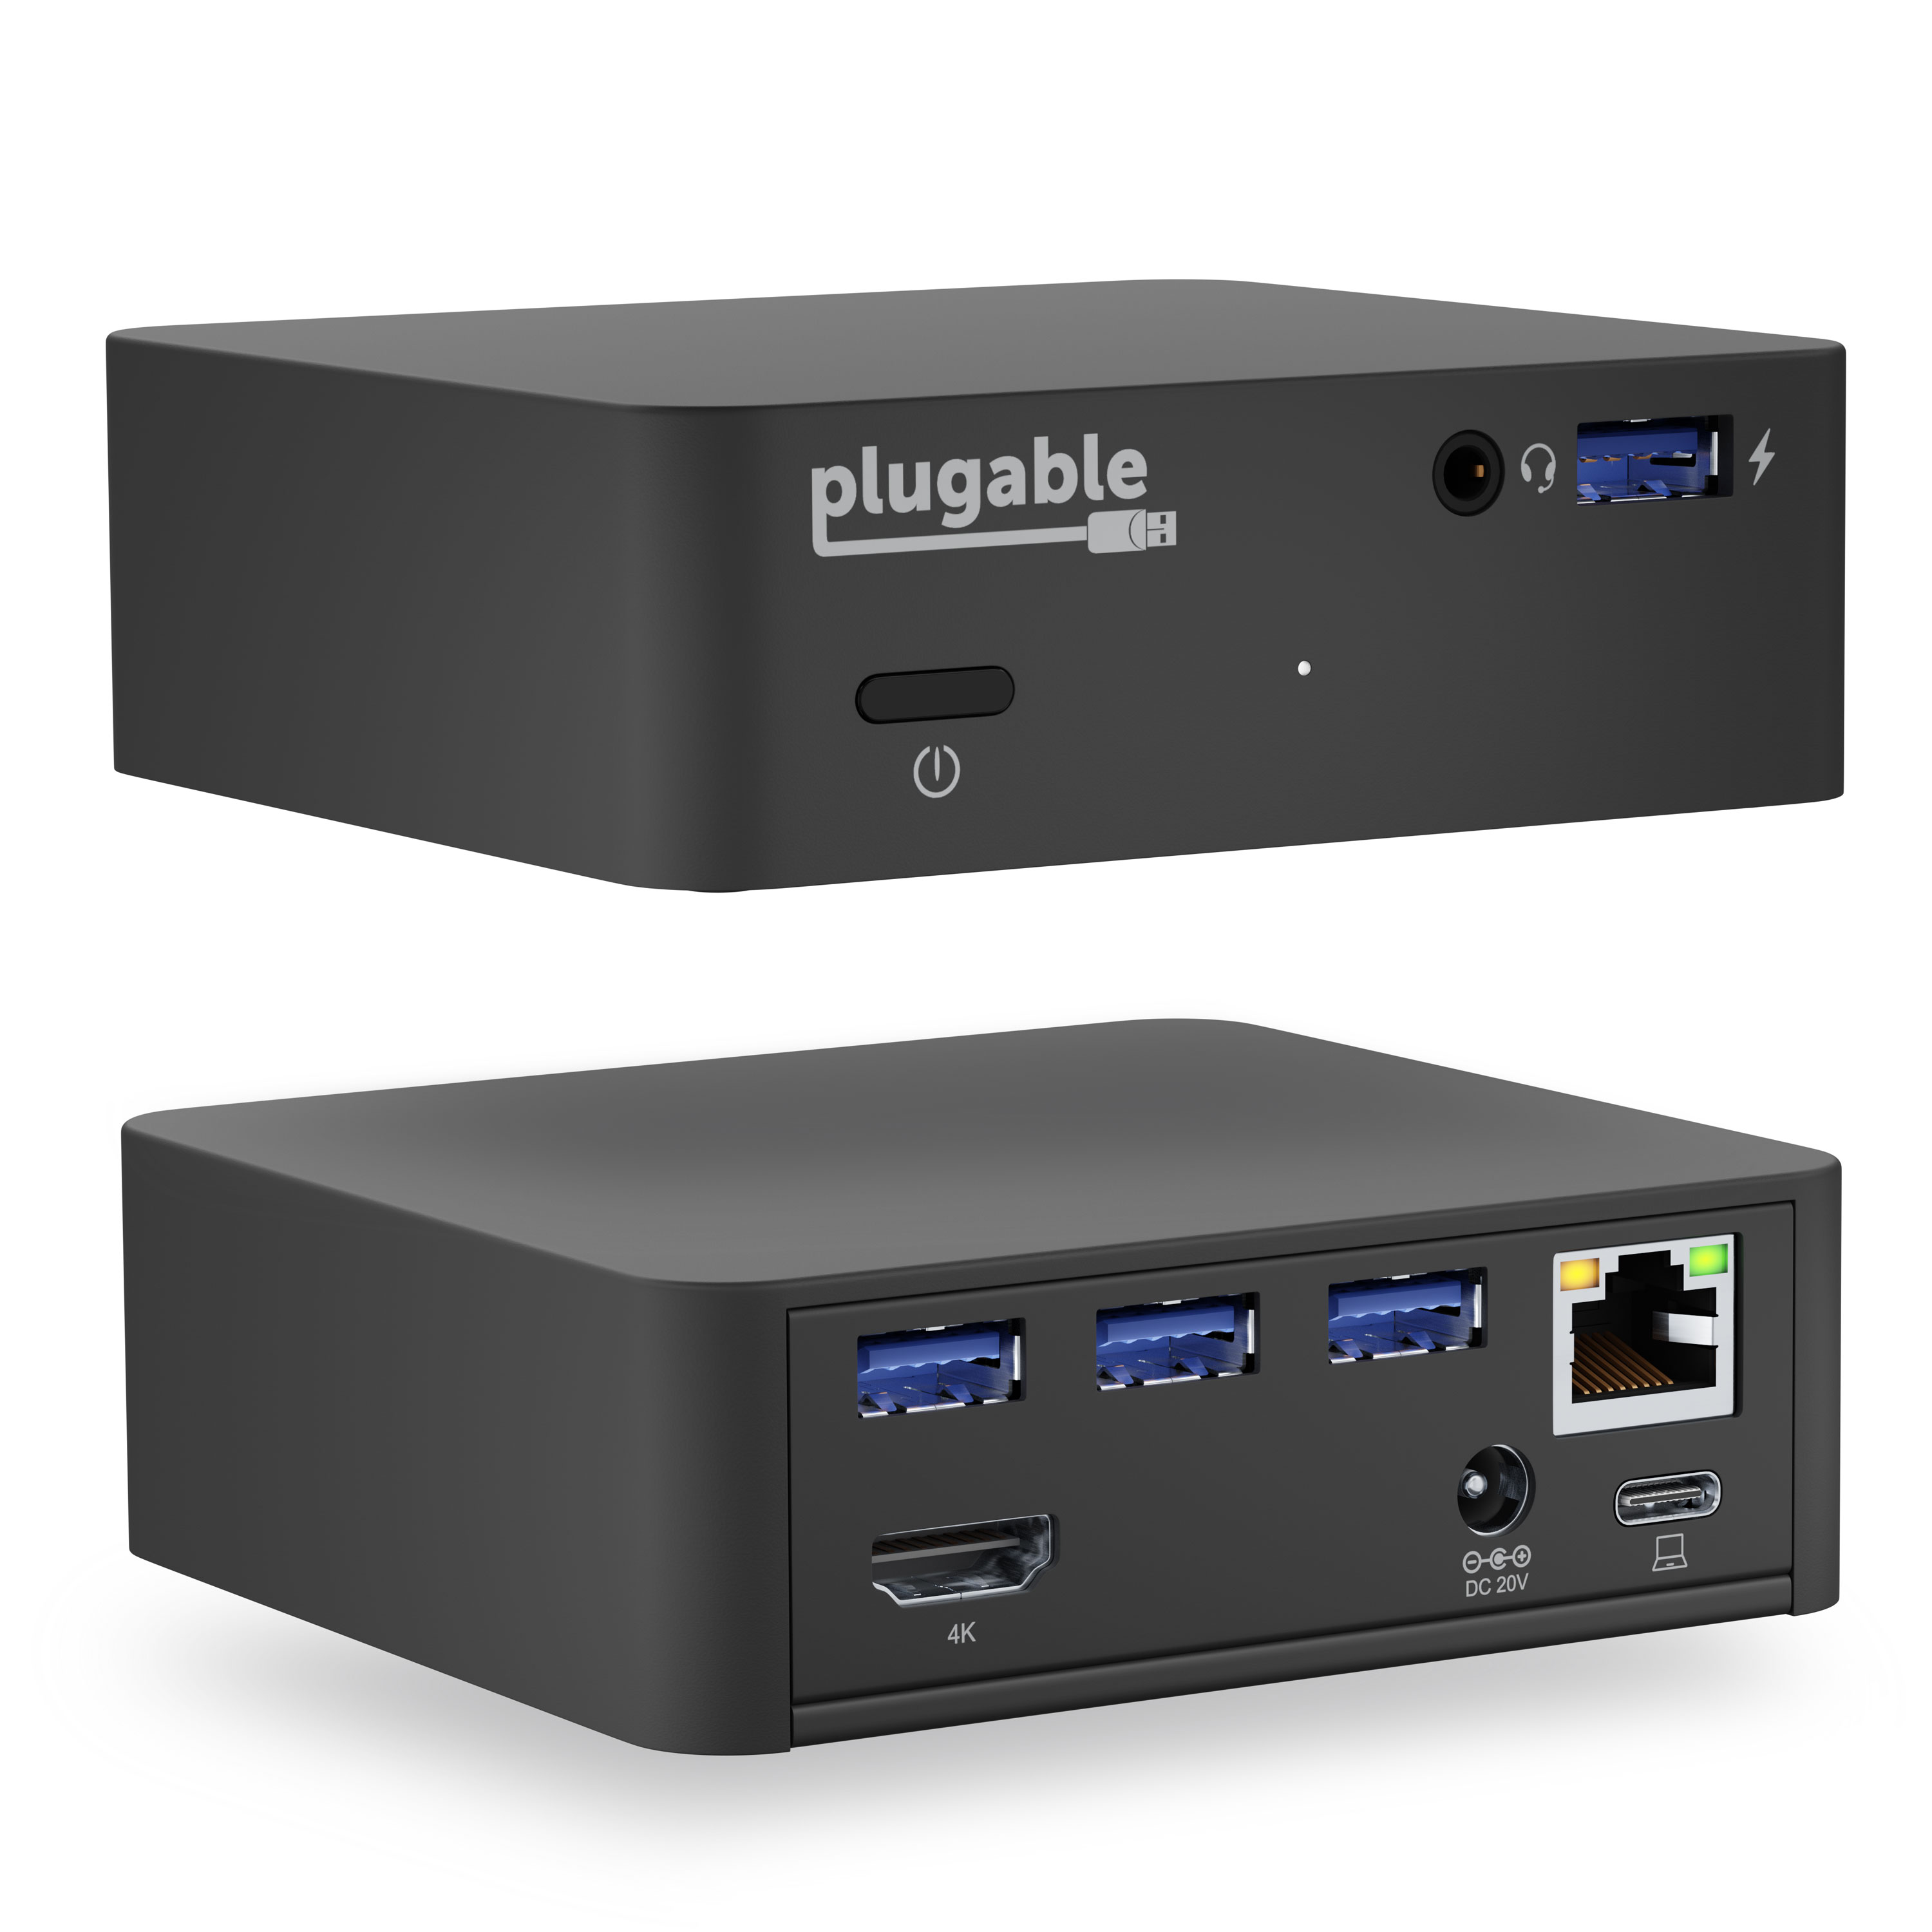 Plugable USB C Dock with 85W Charging Compatible with Thunderbolt 3 and USB-C MacBooks and Select Windows Laptops (HDMI up to 4K@30Hz, Ethernet, 4X USB 3.0 Ports, USB-C PD, includes VESA Mount) - image 1 of 6